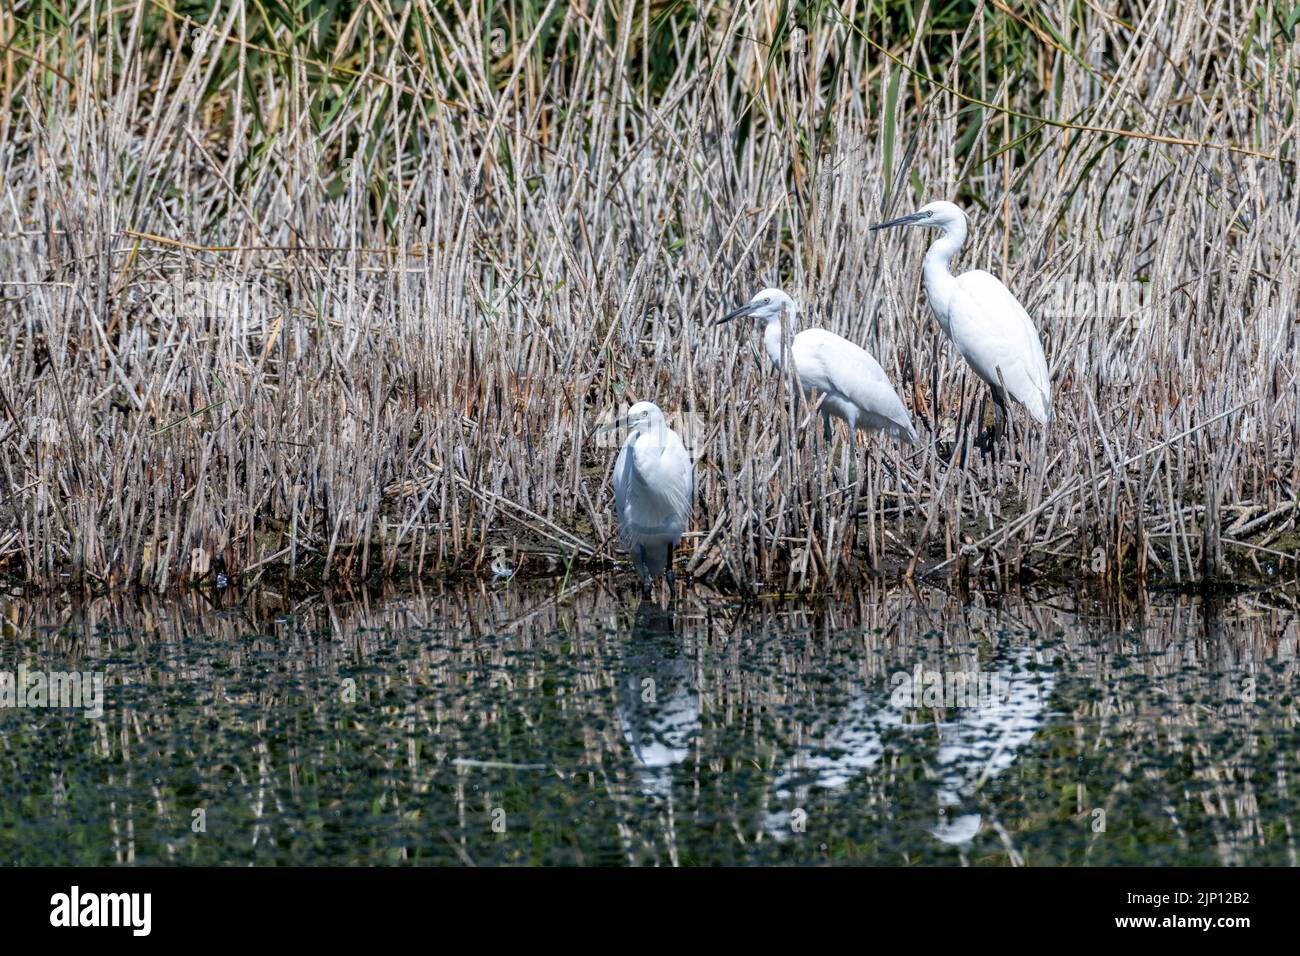 Three Little Egrets at Magor Marsh in Monmouthshire, Wales, UK. The marsh is drying up highlighting global warming and climate change. Stock Photo